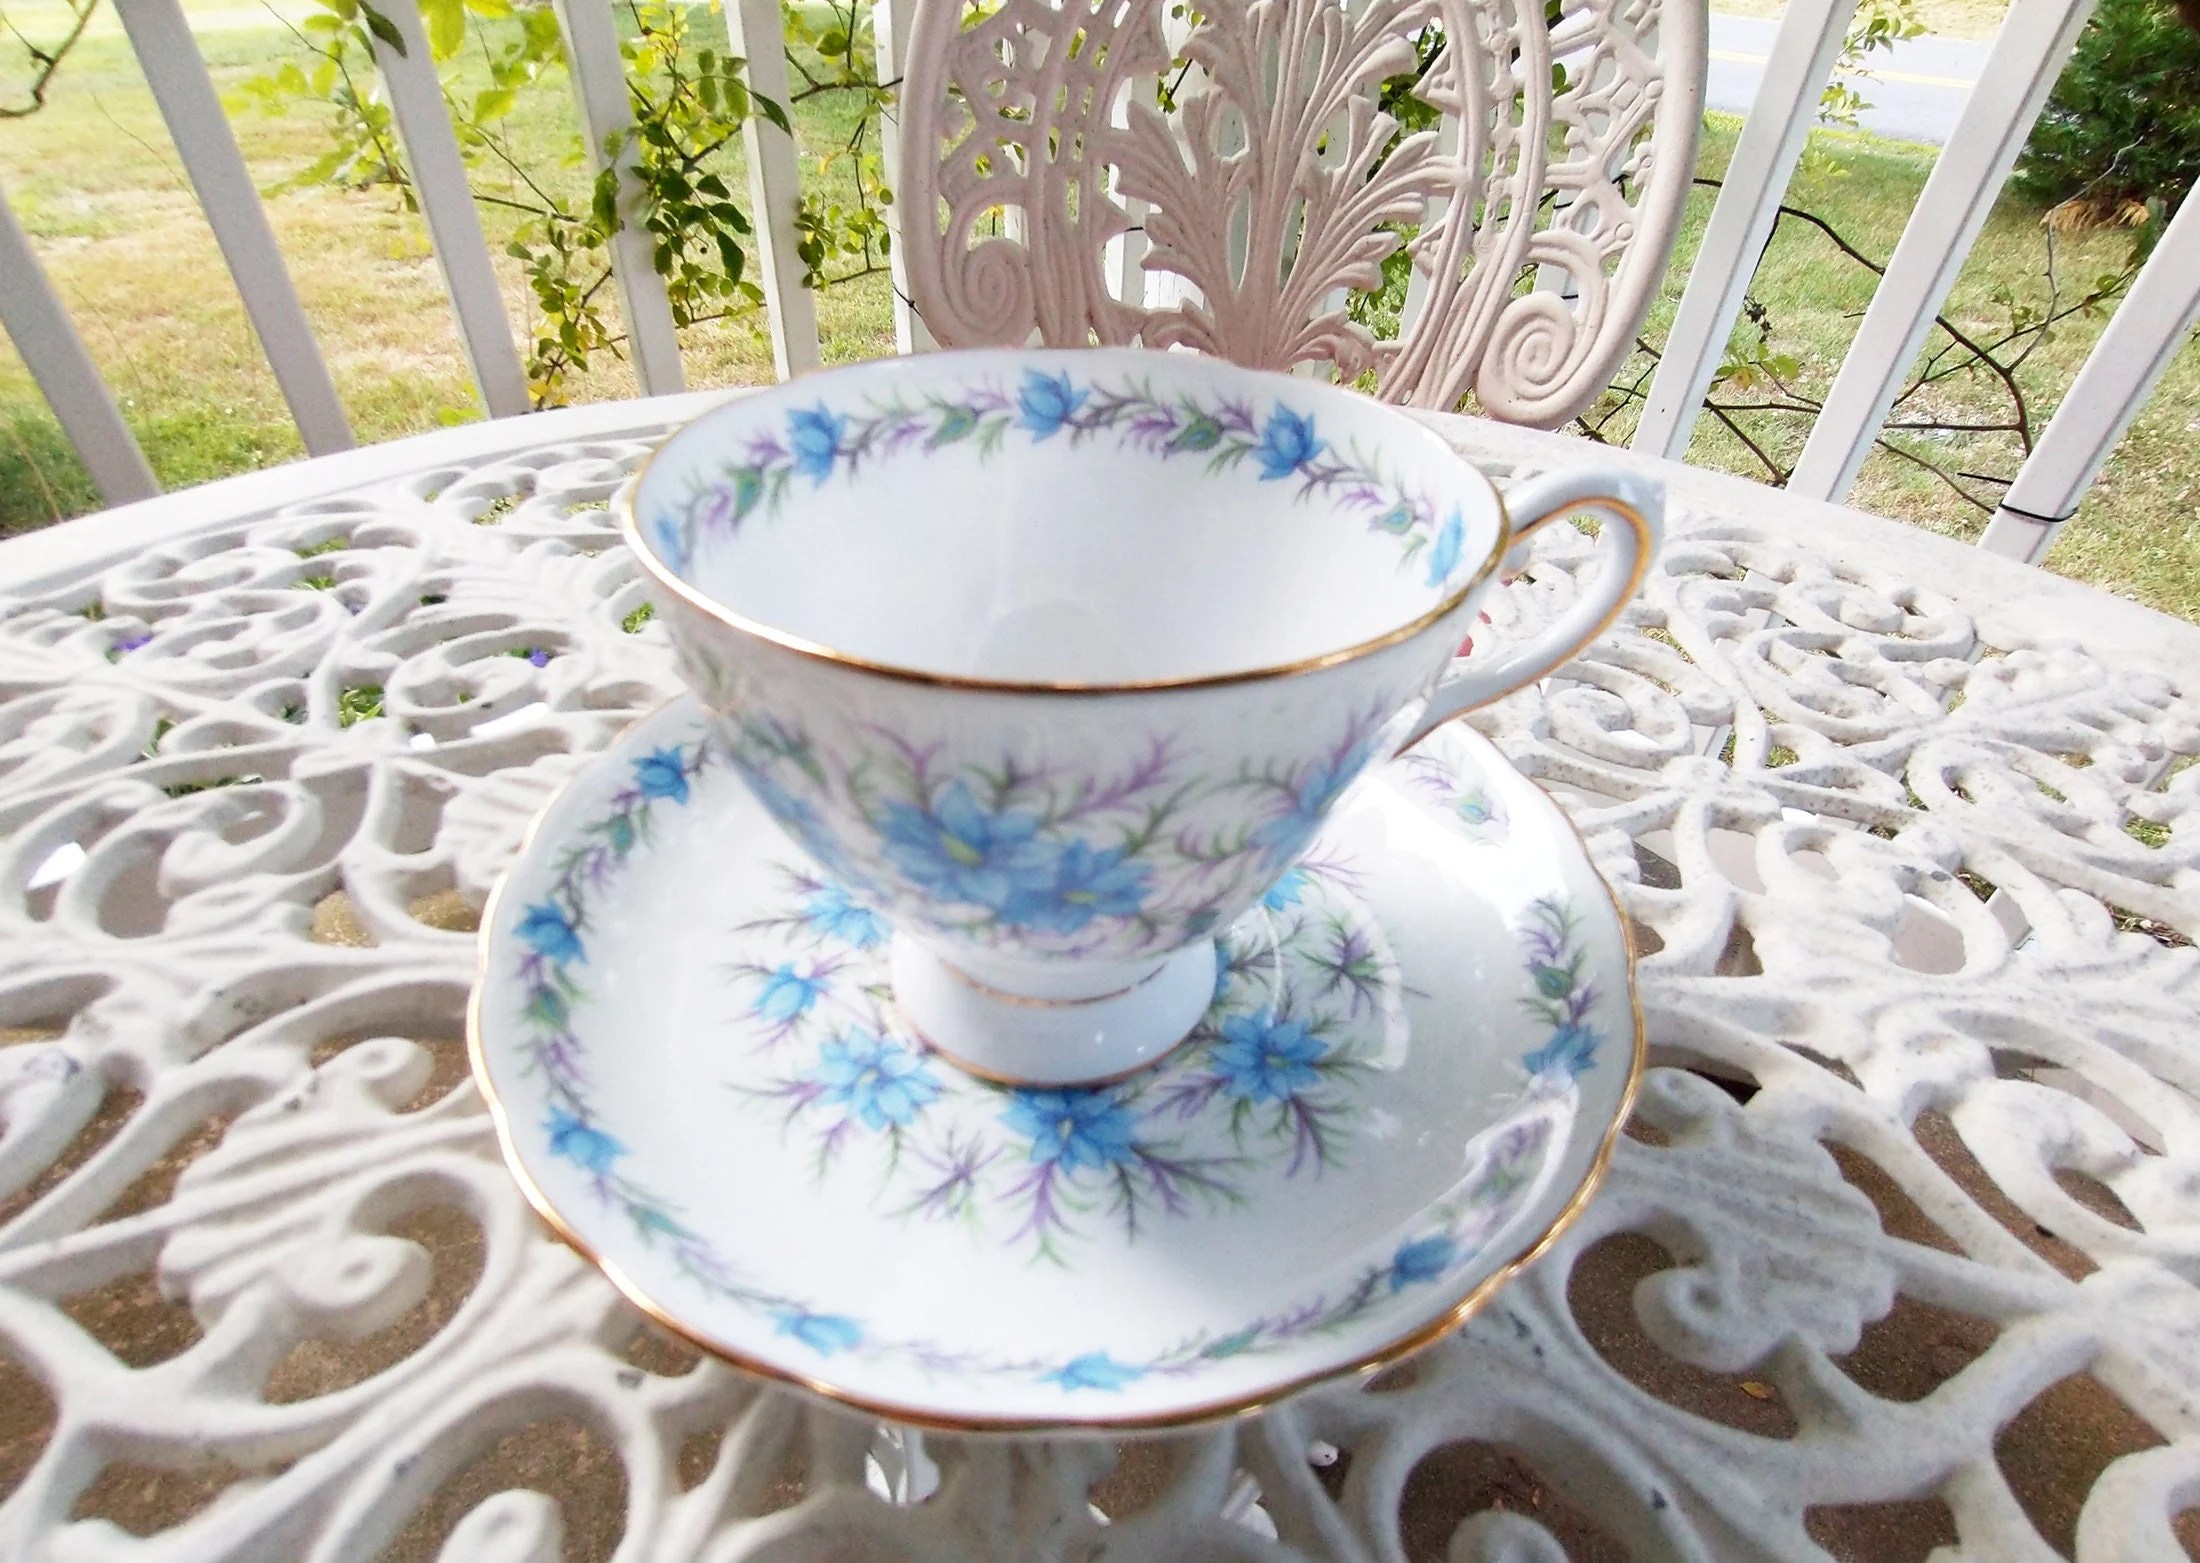 Tuscan Bone China Love in the Mist Pattern Tea Cup & Saucer Set - England, Country, Cottage, Farmhouse, English, Floral, Blue, Gold Trim